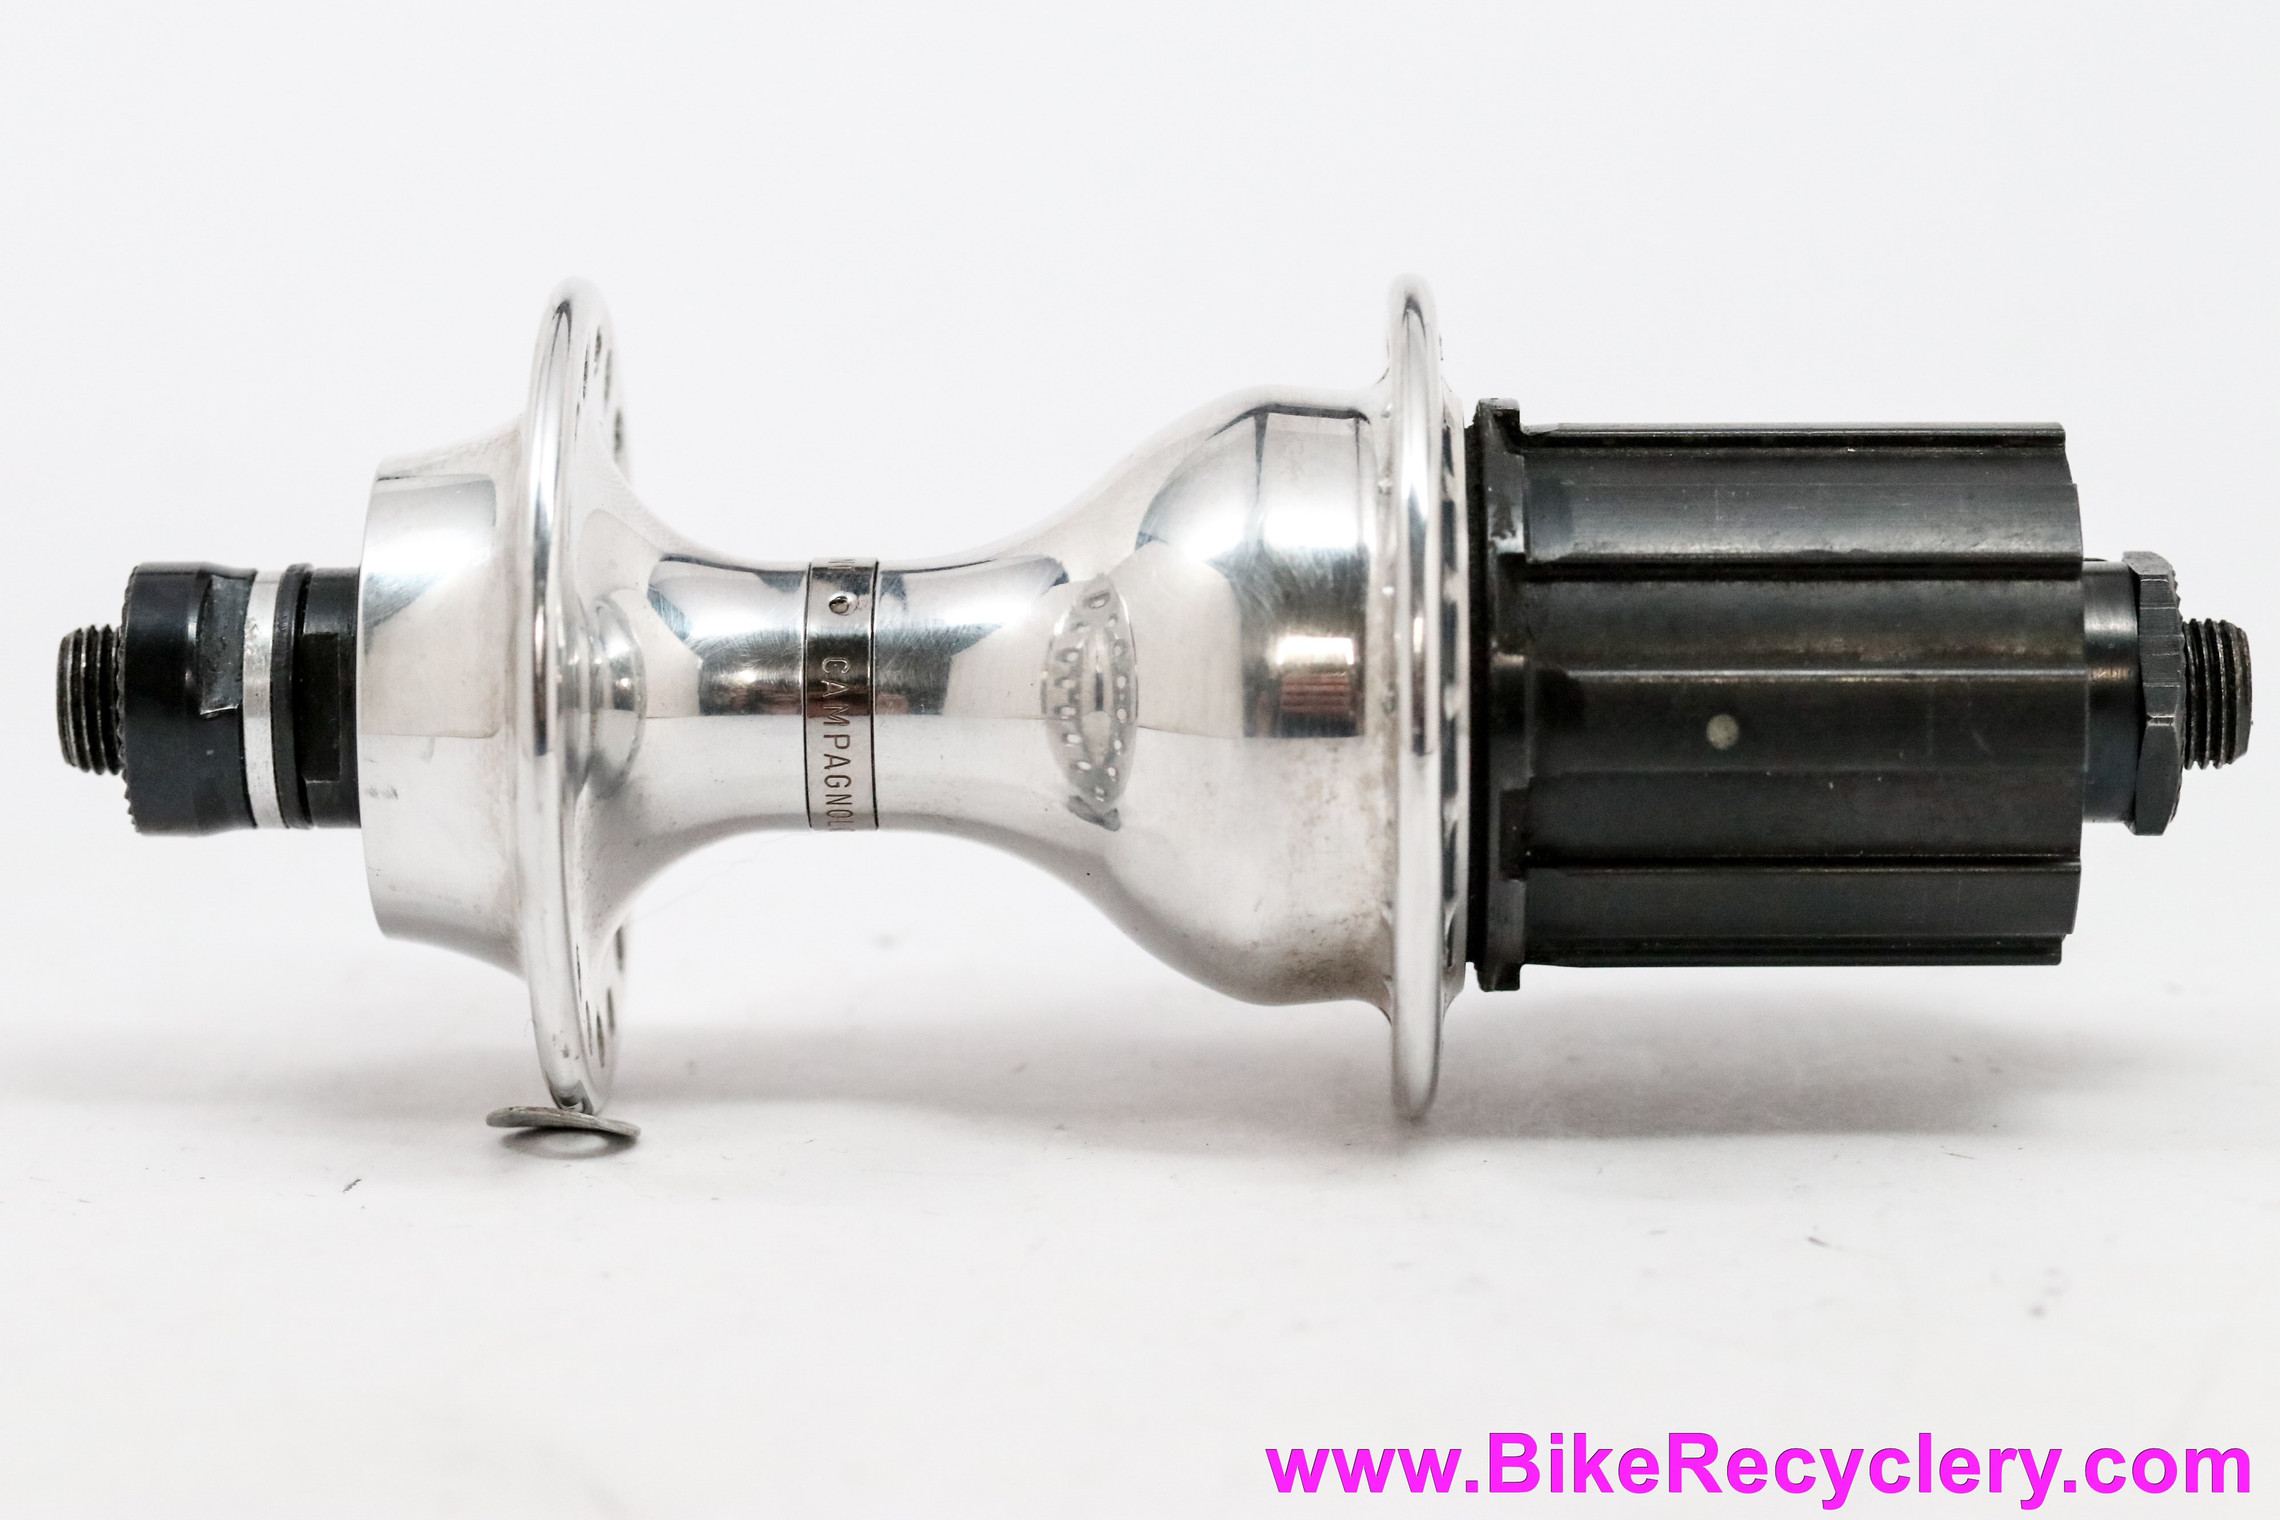 Campagnolo Record 8 Speed Rear Hub: 36H x 130mm - Early 1990's (Take-Off)